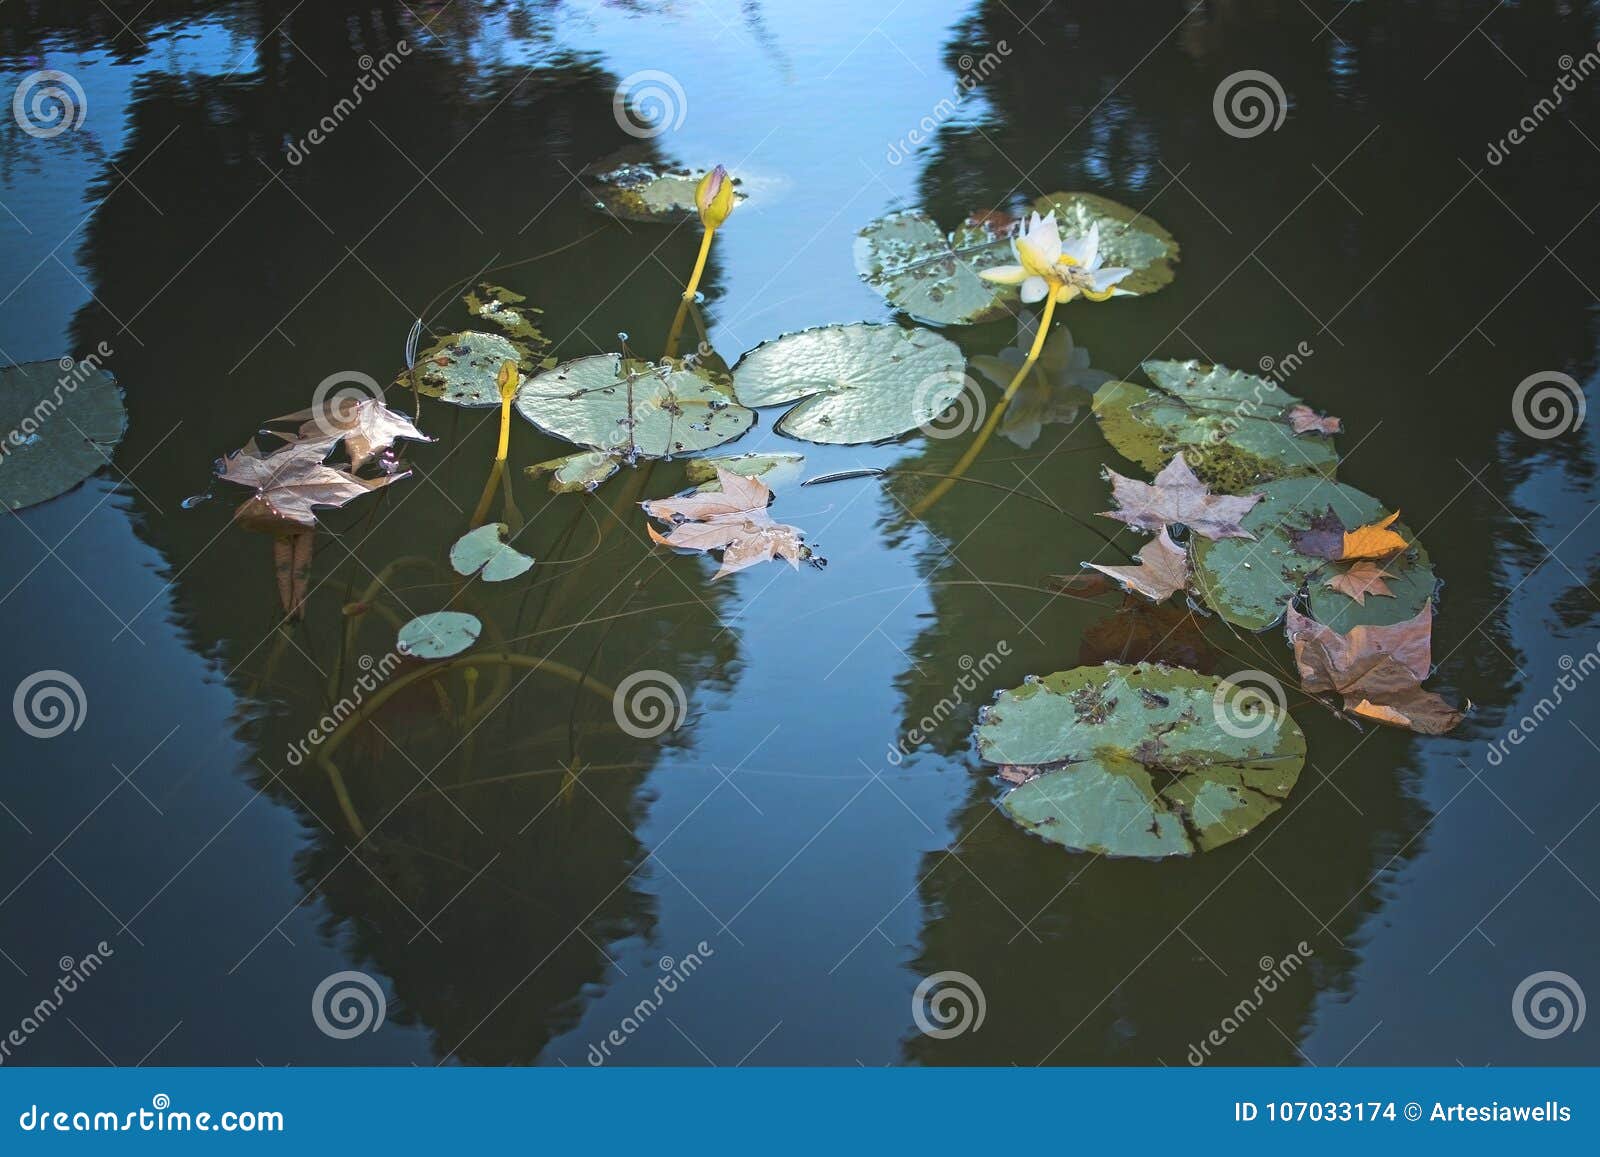 waterlilies and leaves in murky pond